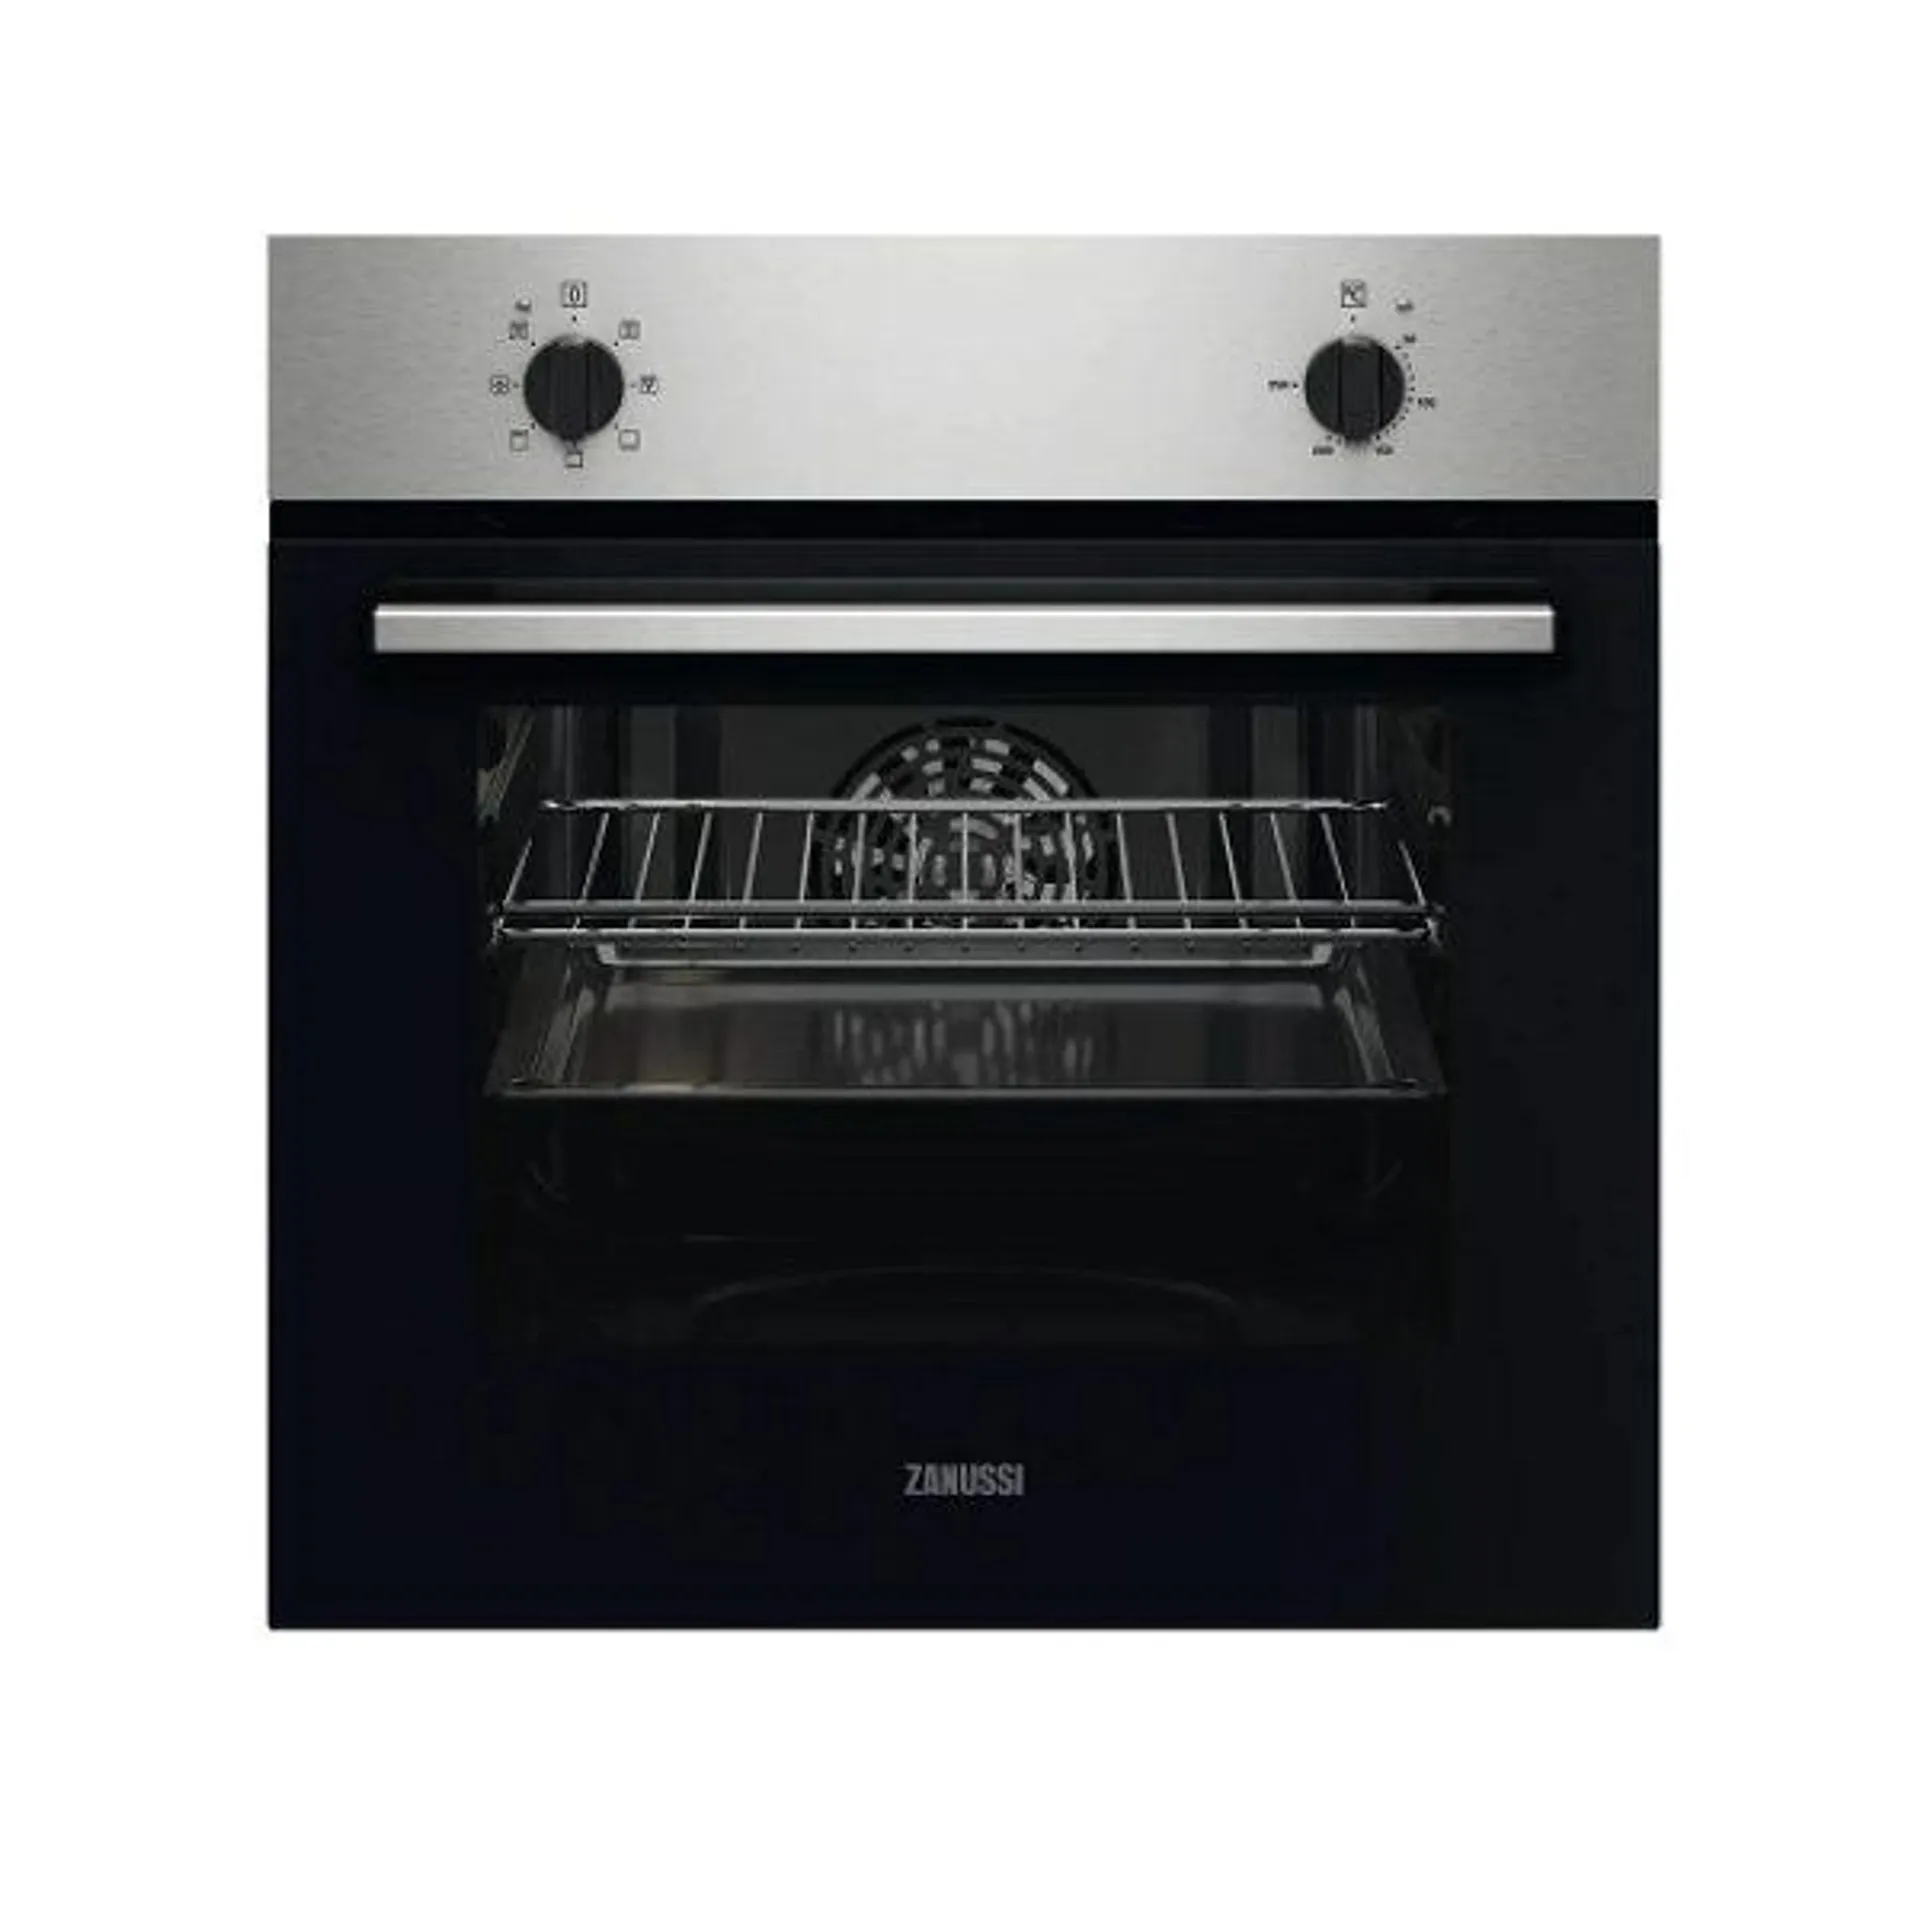 Zanussi 58L Built-In Electric Single Oven – Stainless Steel